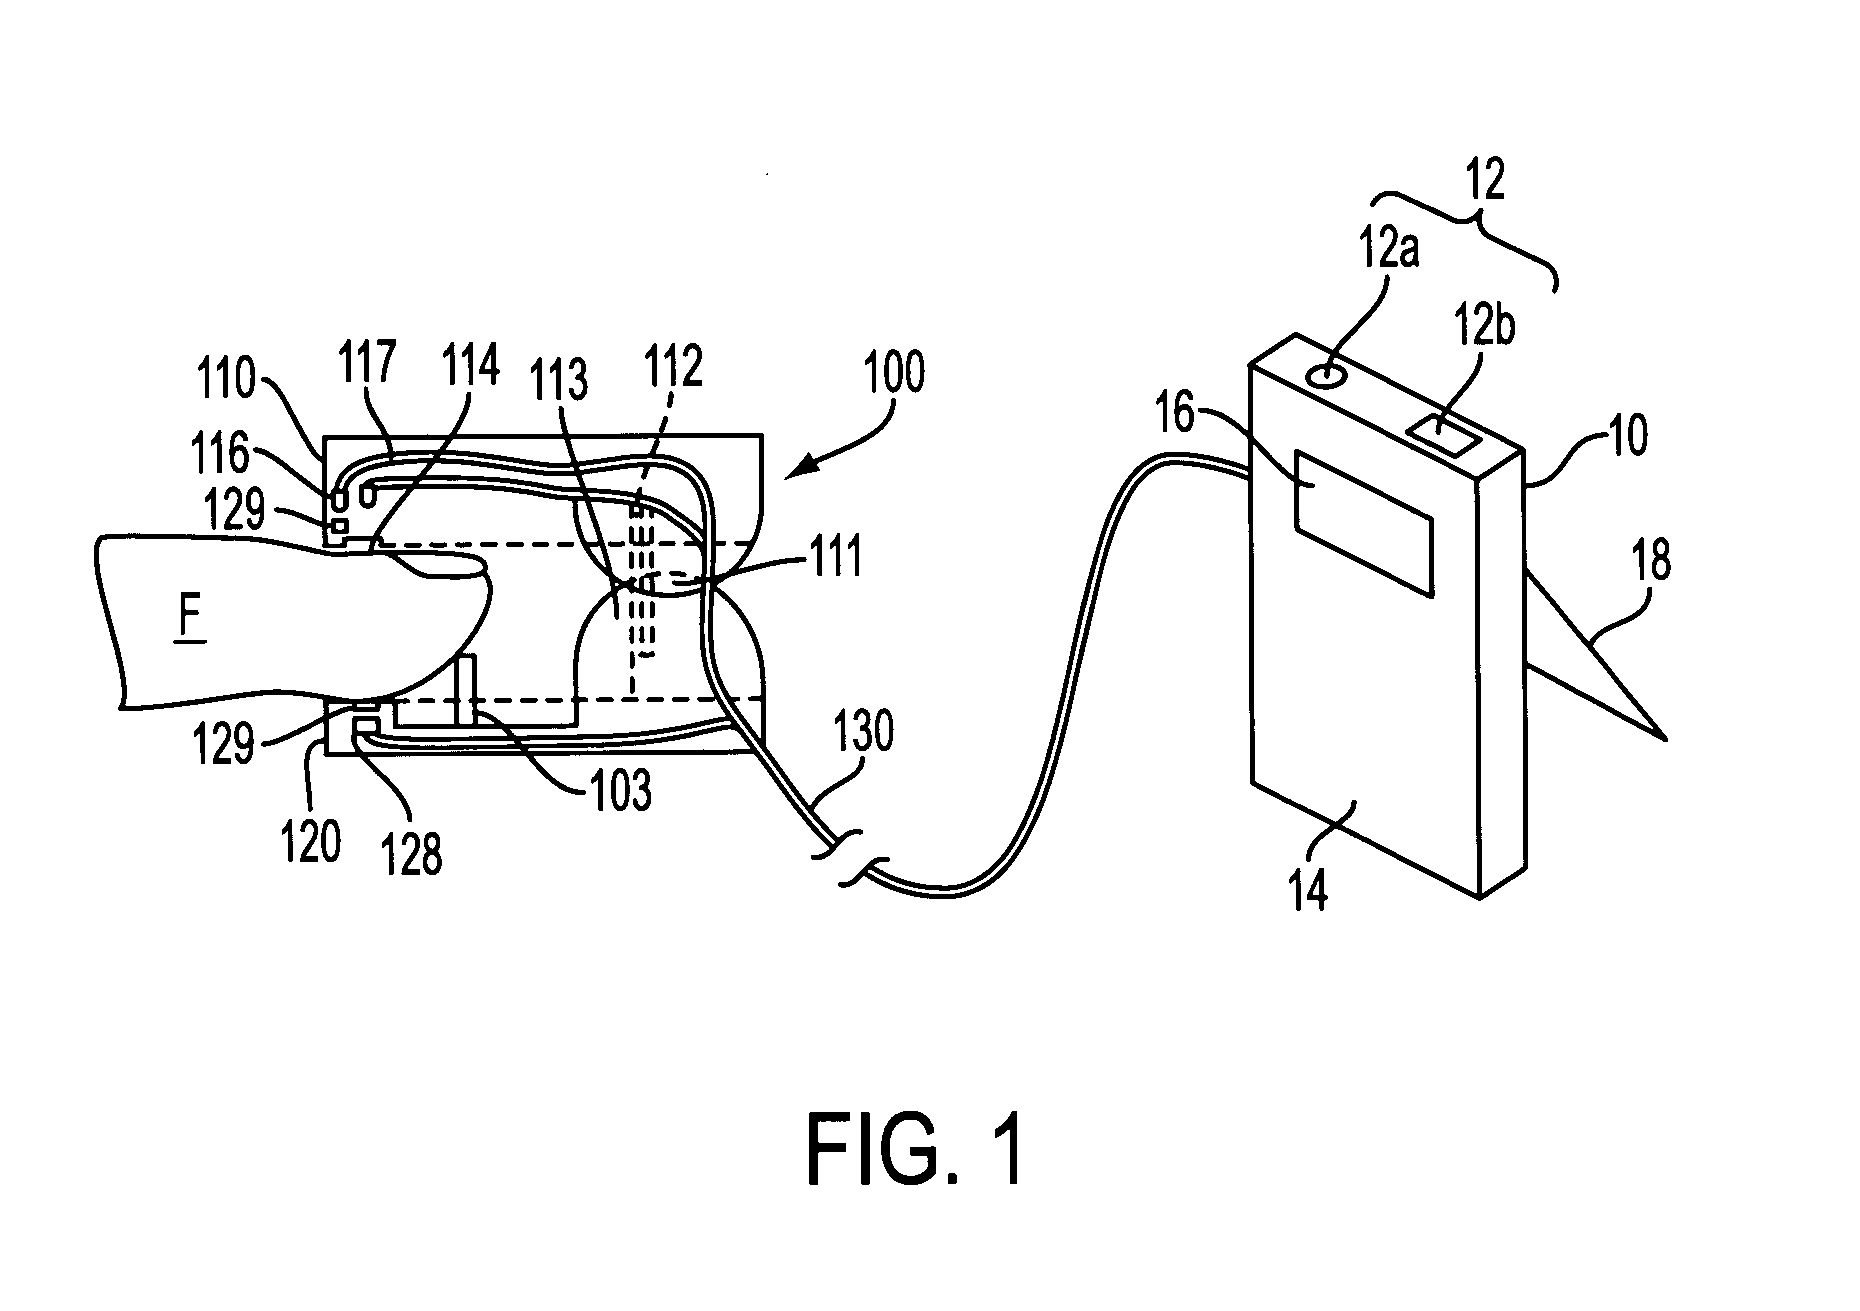 Low-cost method and apparatus for non-invasively measuring blood glucose levels